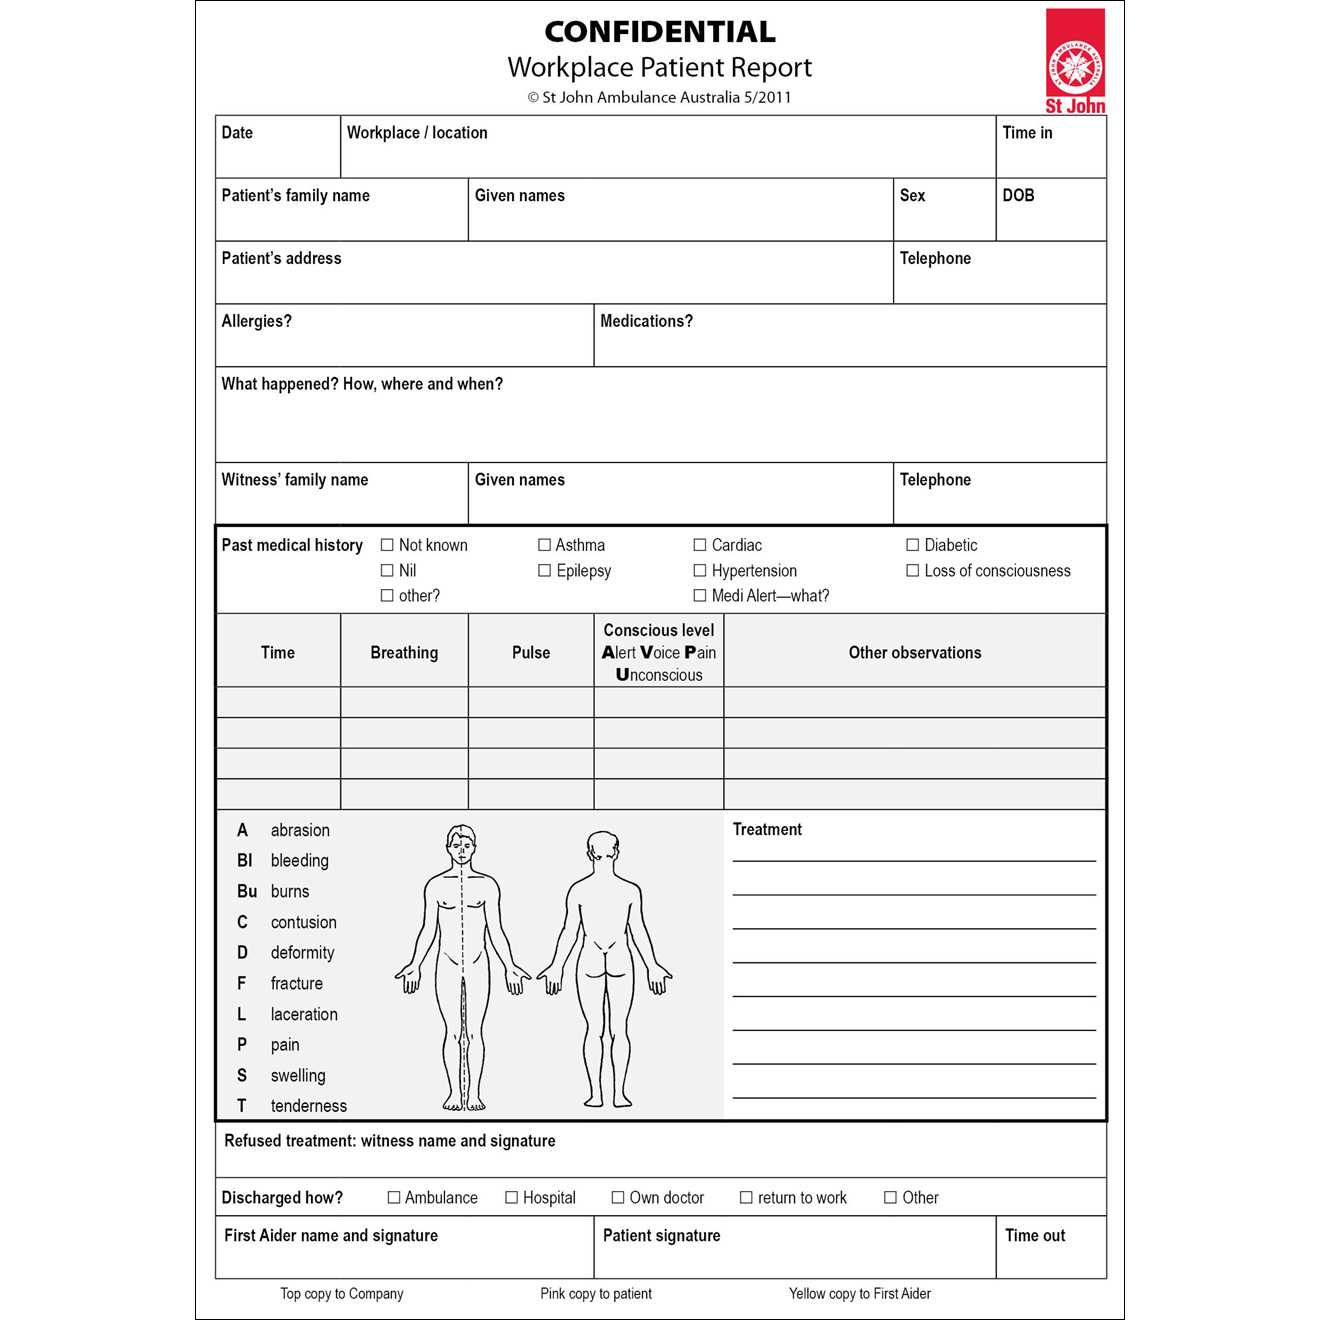 First Aid Incident Report Form - The Guide Ways With Regard To First Aid Incident Report Form Template